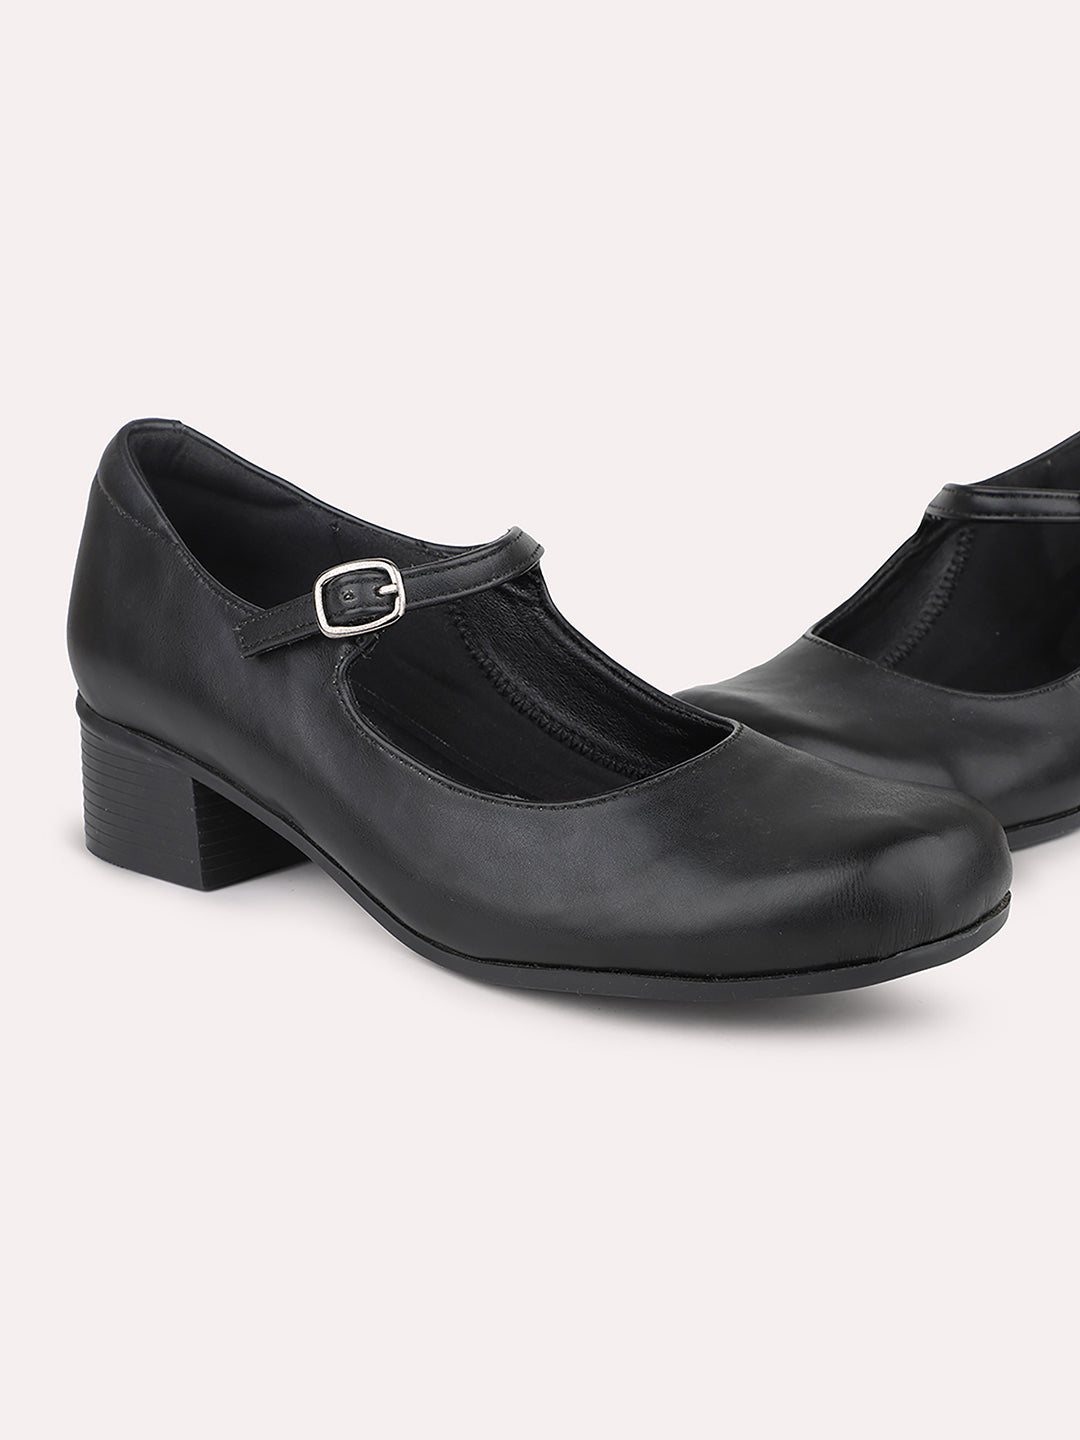 Women Black Square Toe Block Pumps With Buckles